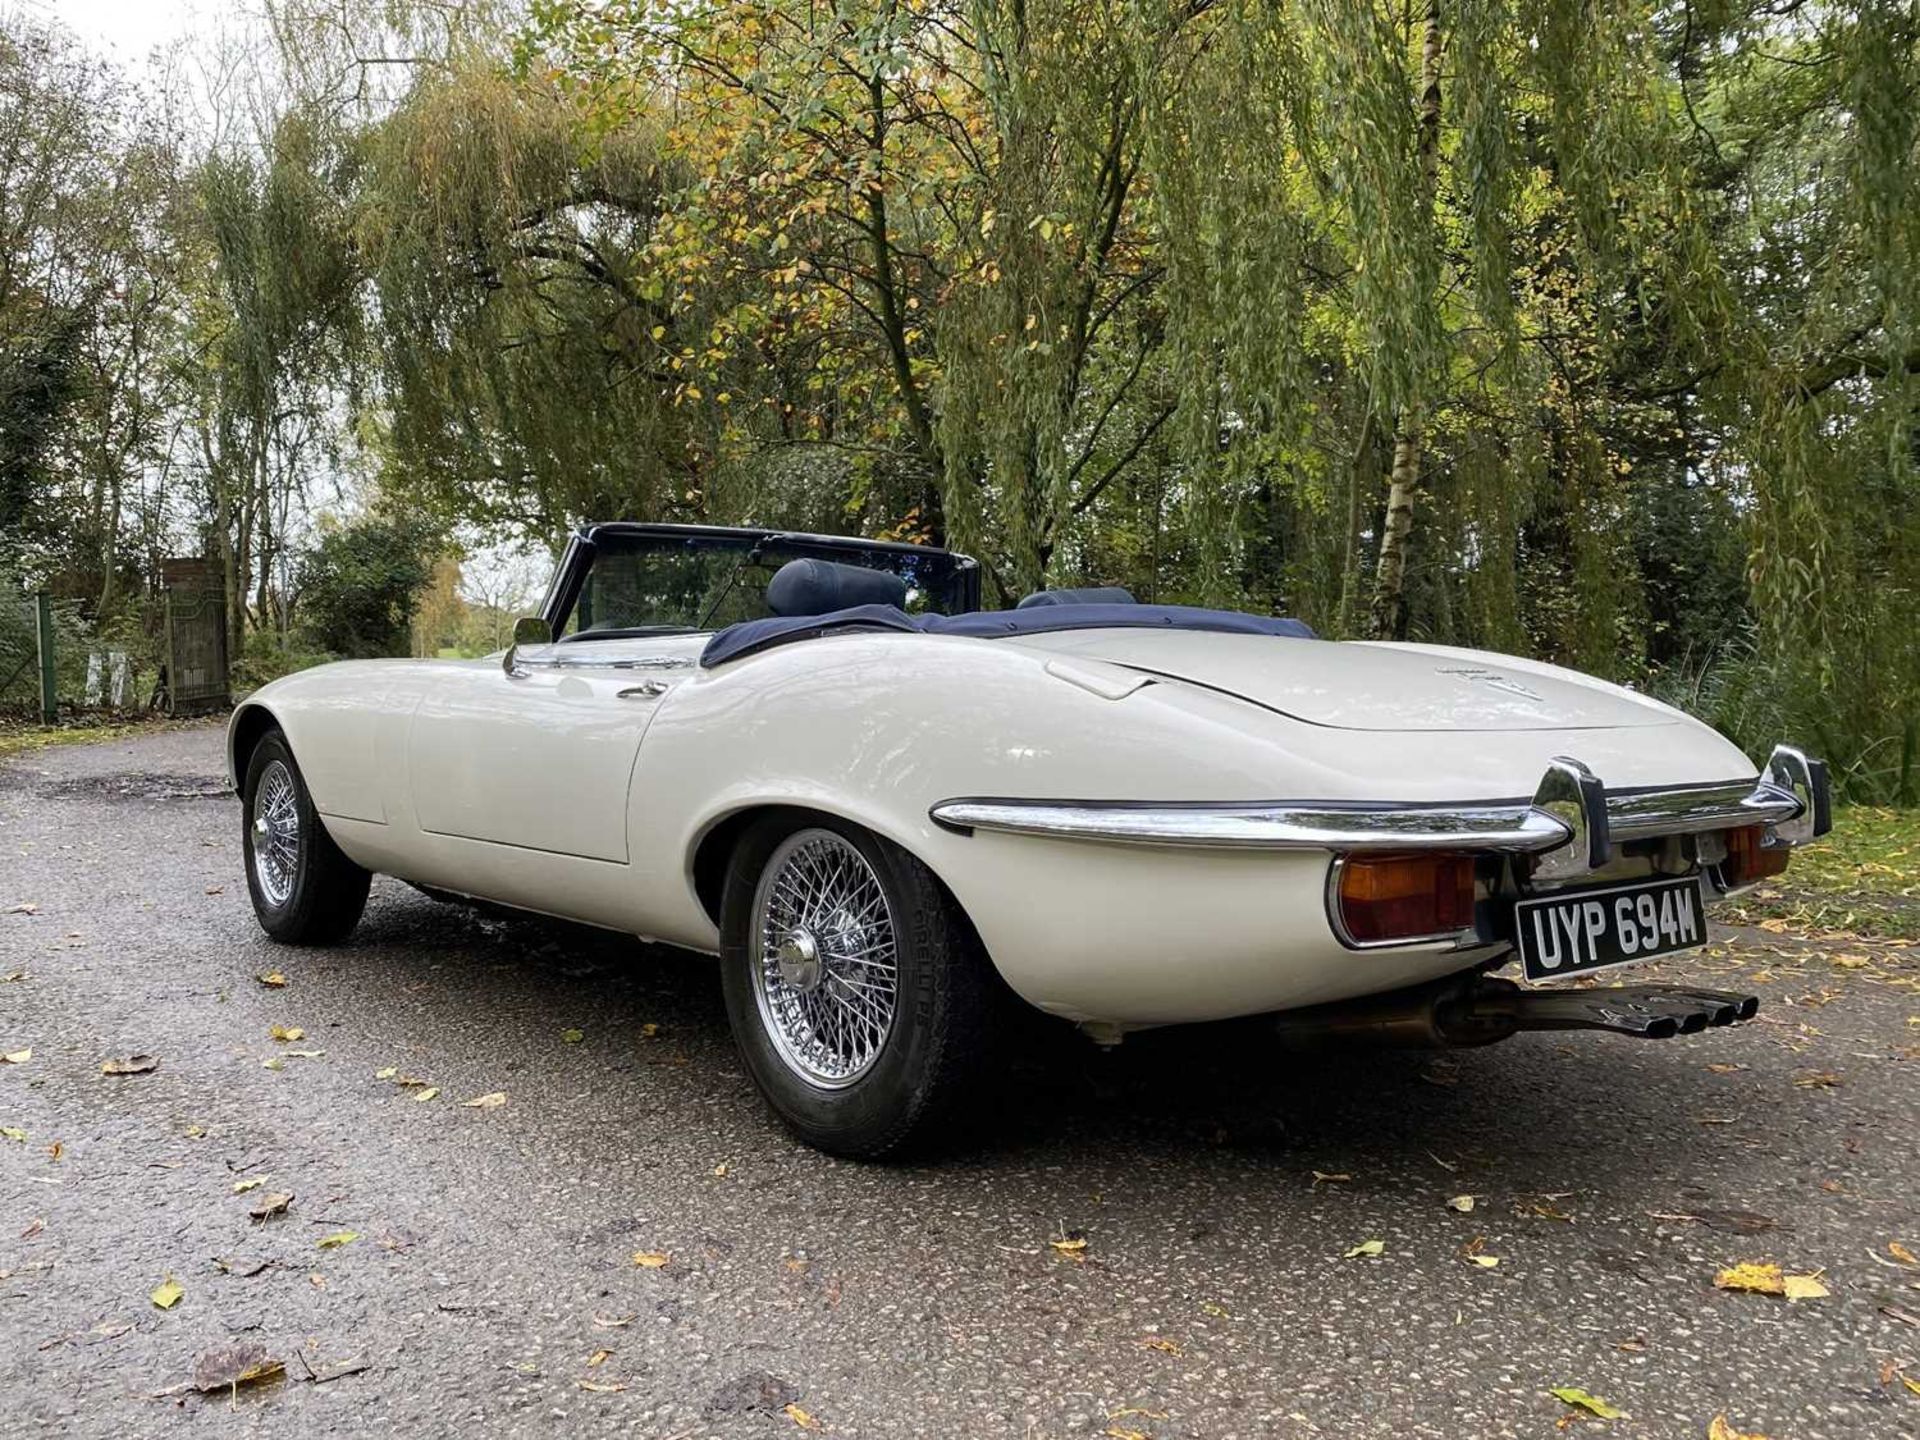 1973 Jaguar E-Type V12 Roadster As seen in Only Fools and Horses - Image 35 of 105